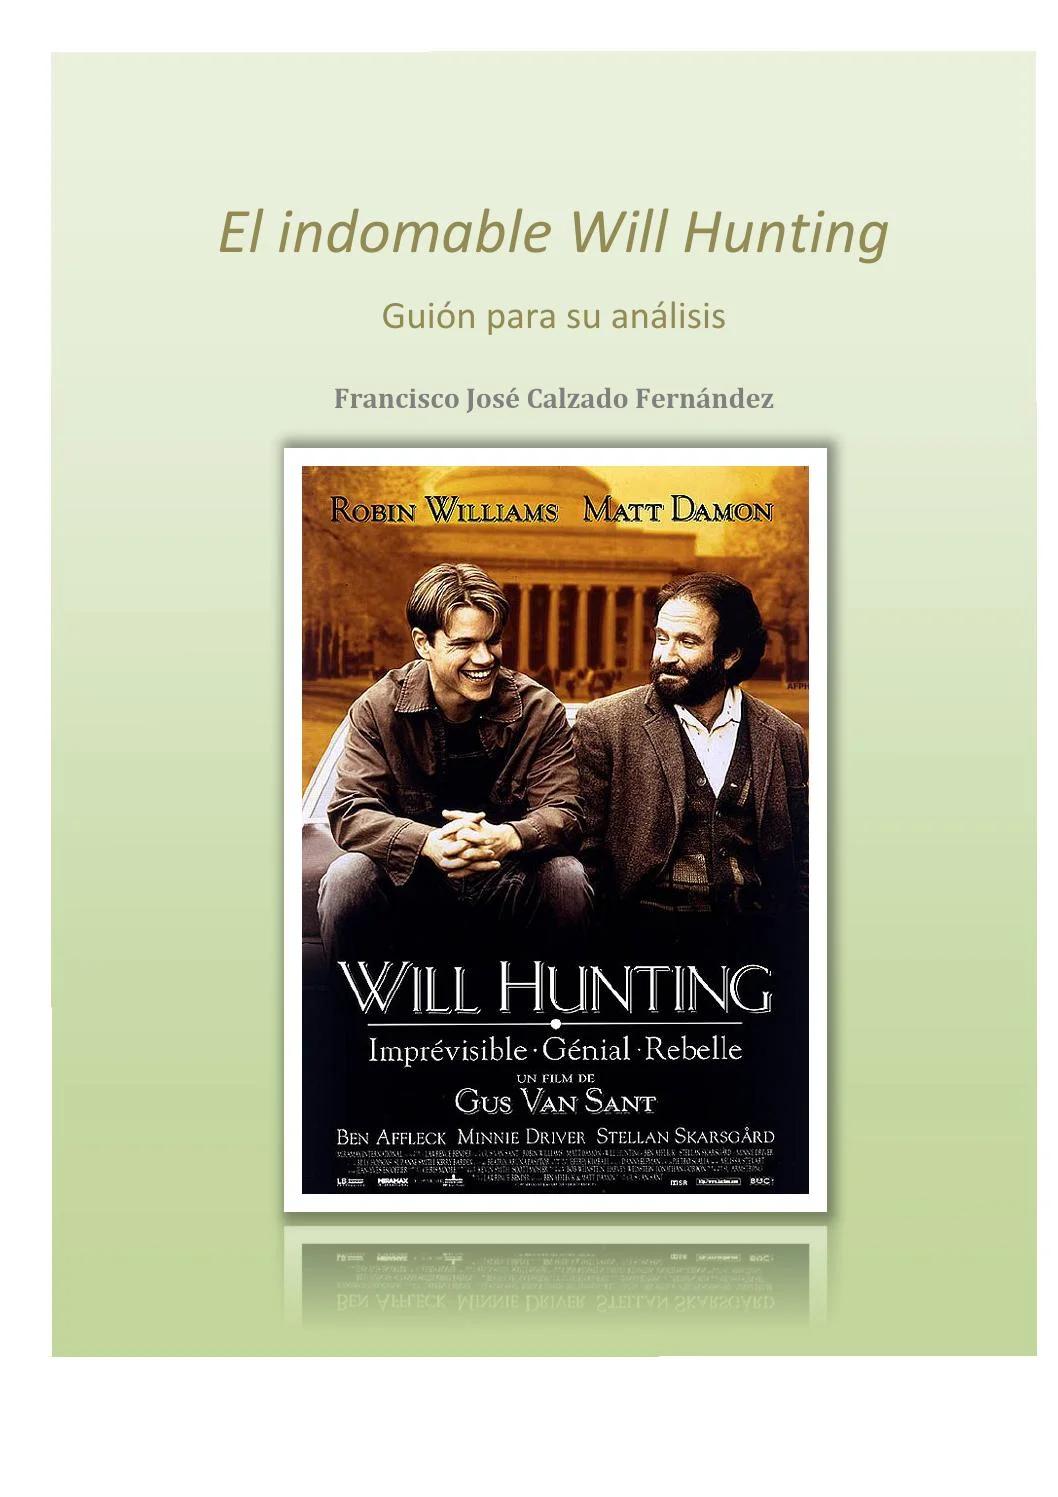 el indomable will hunting psicologia - Cómo era Will Hunting